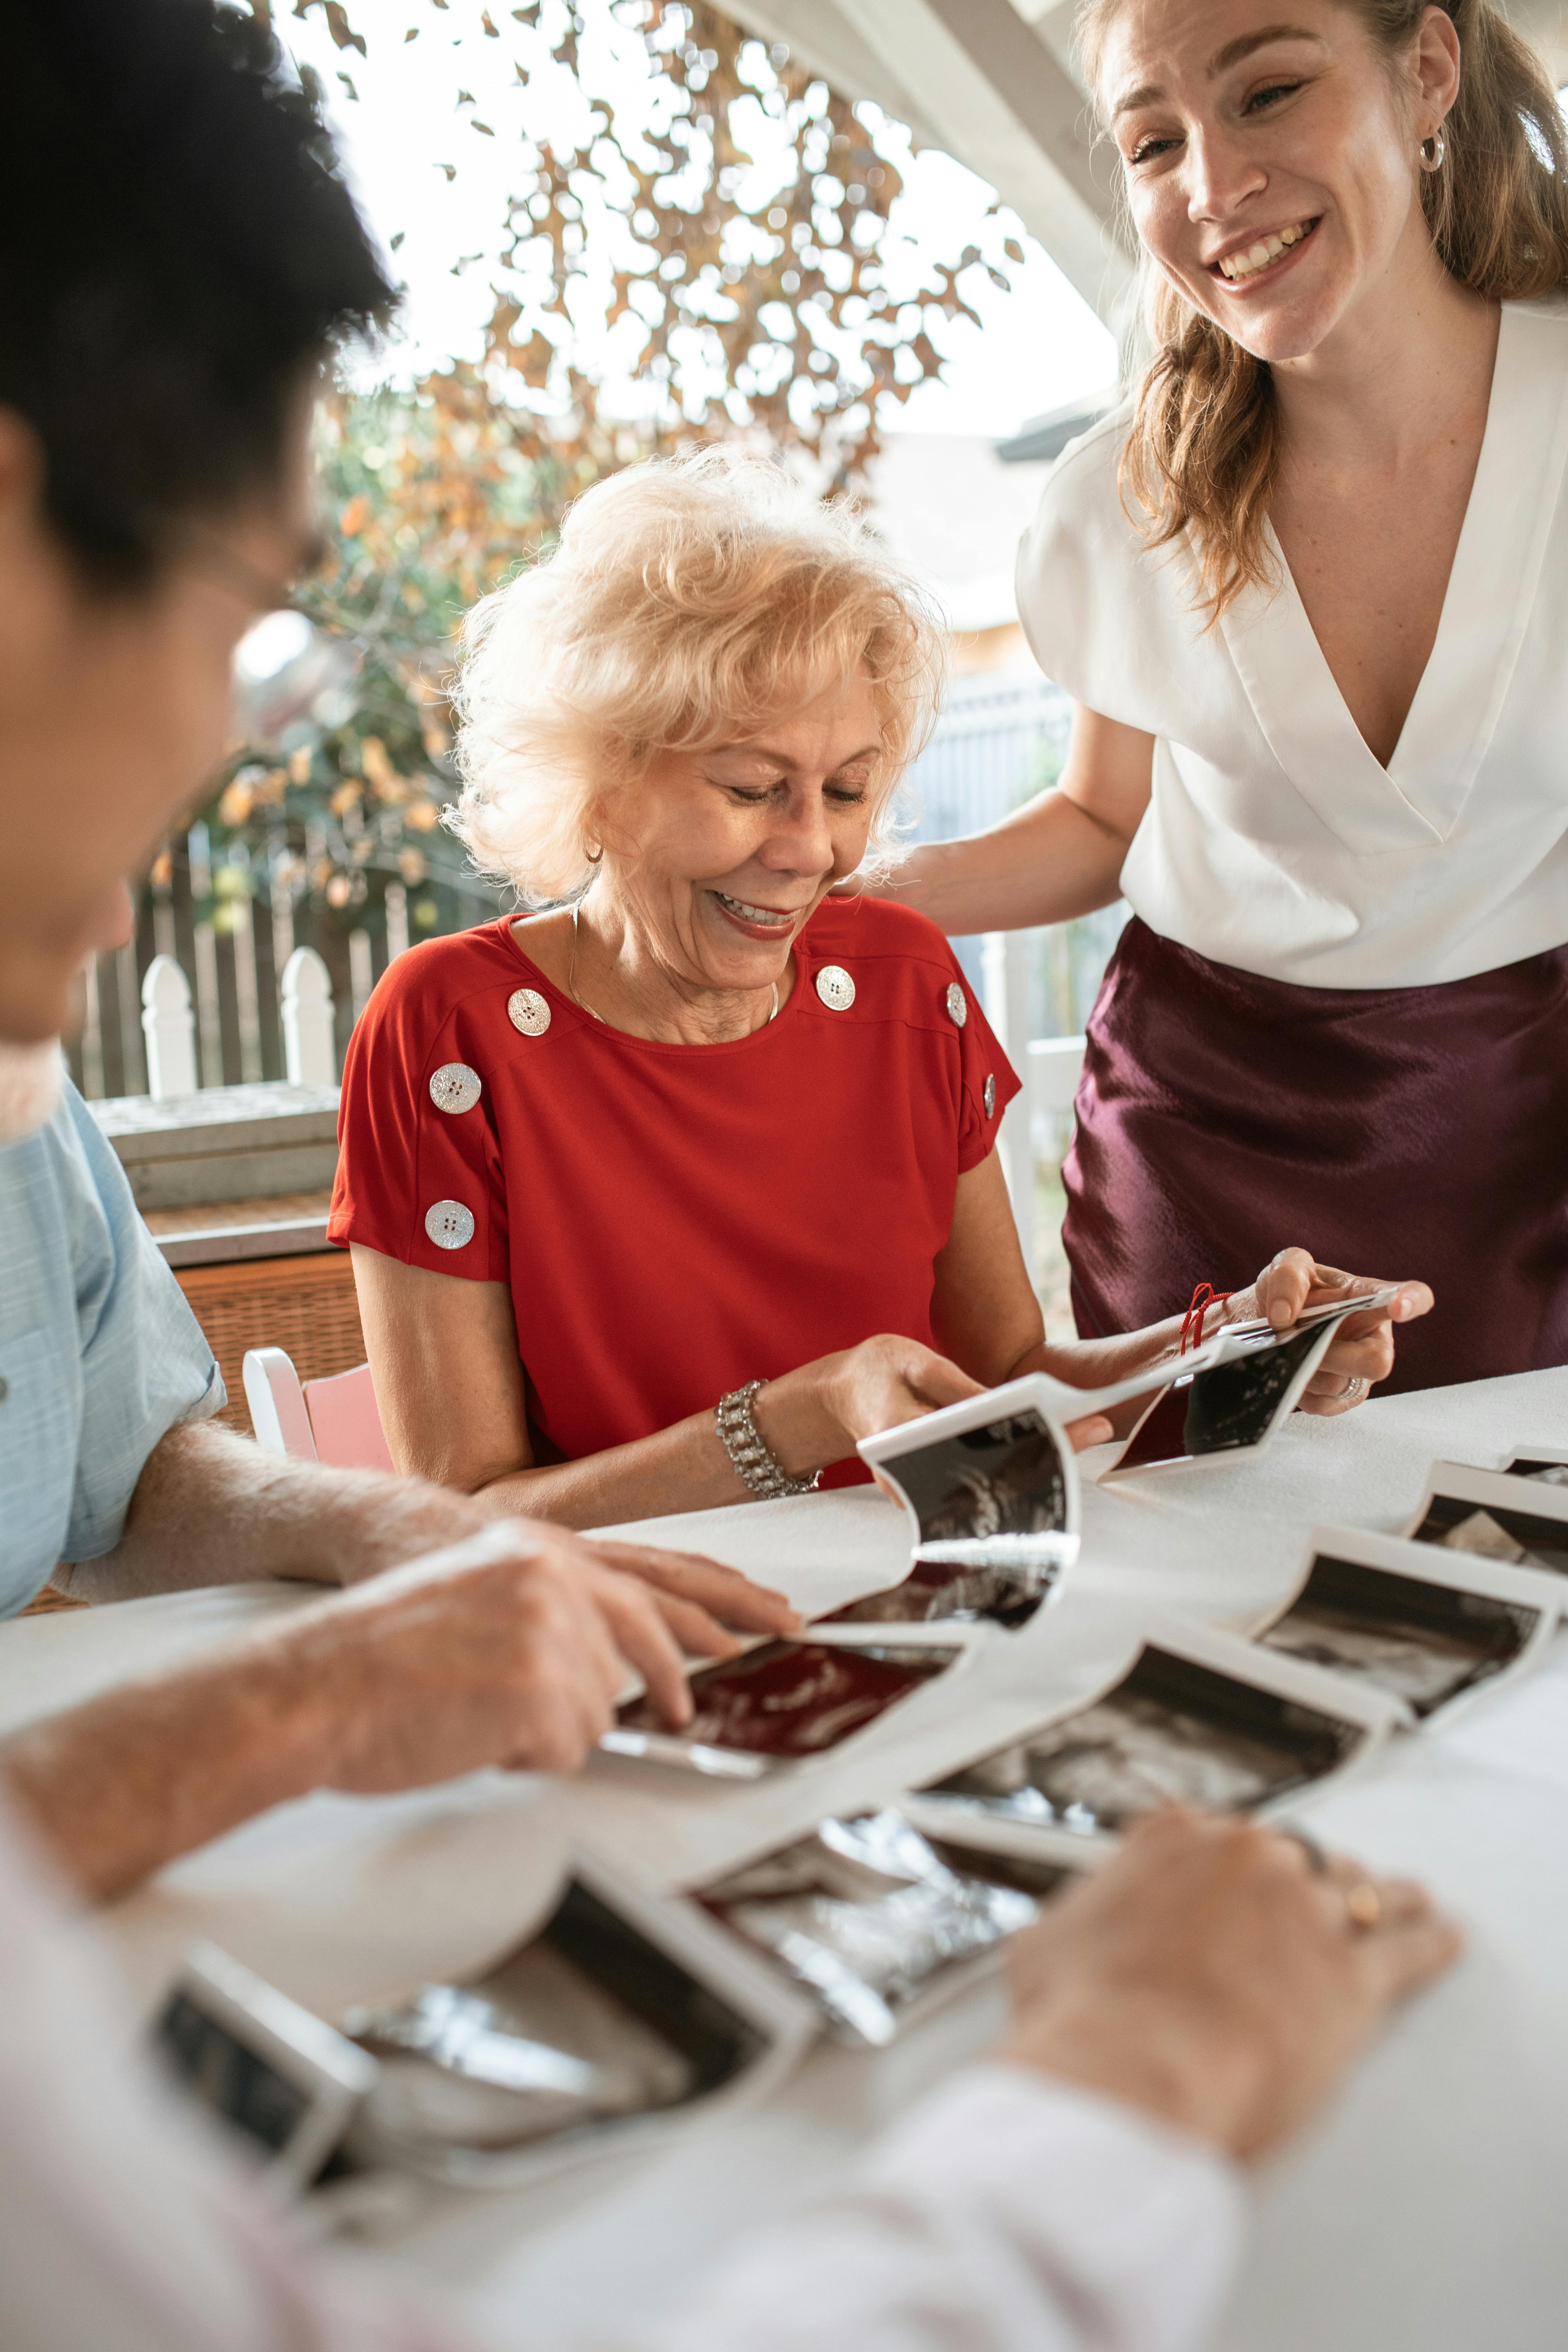 Family looking at photos together | Source: Pexels